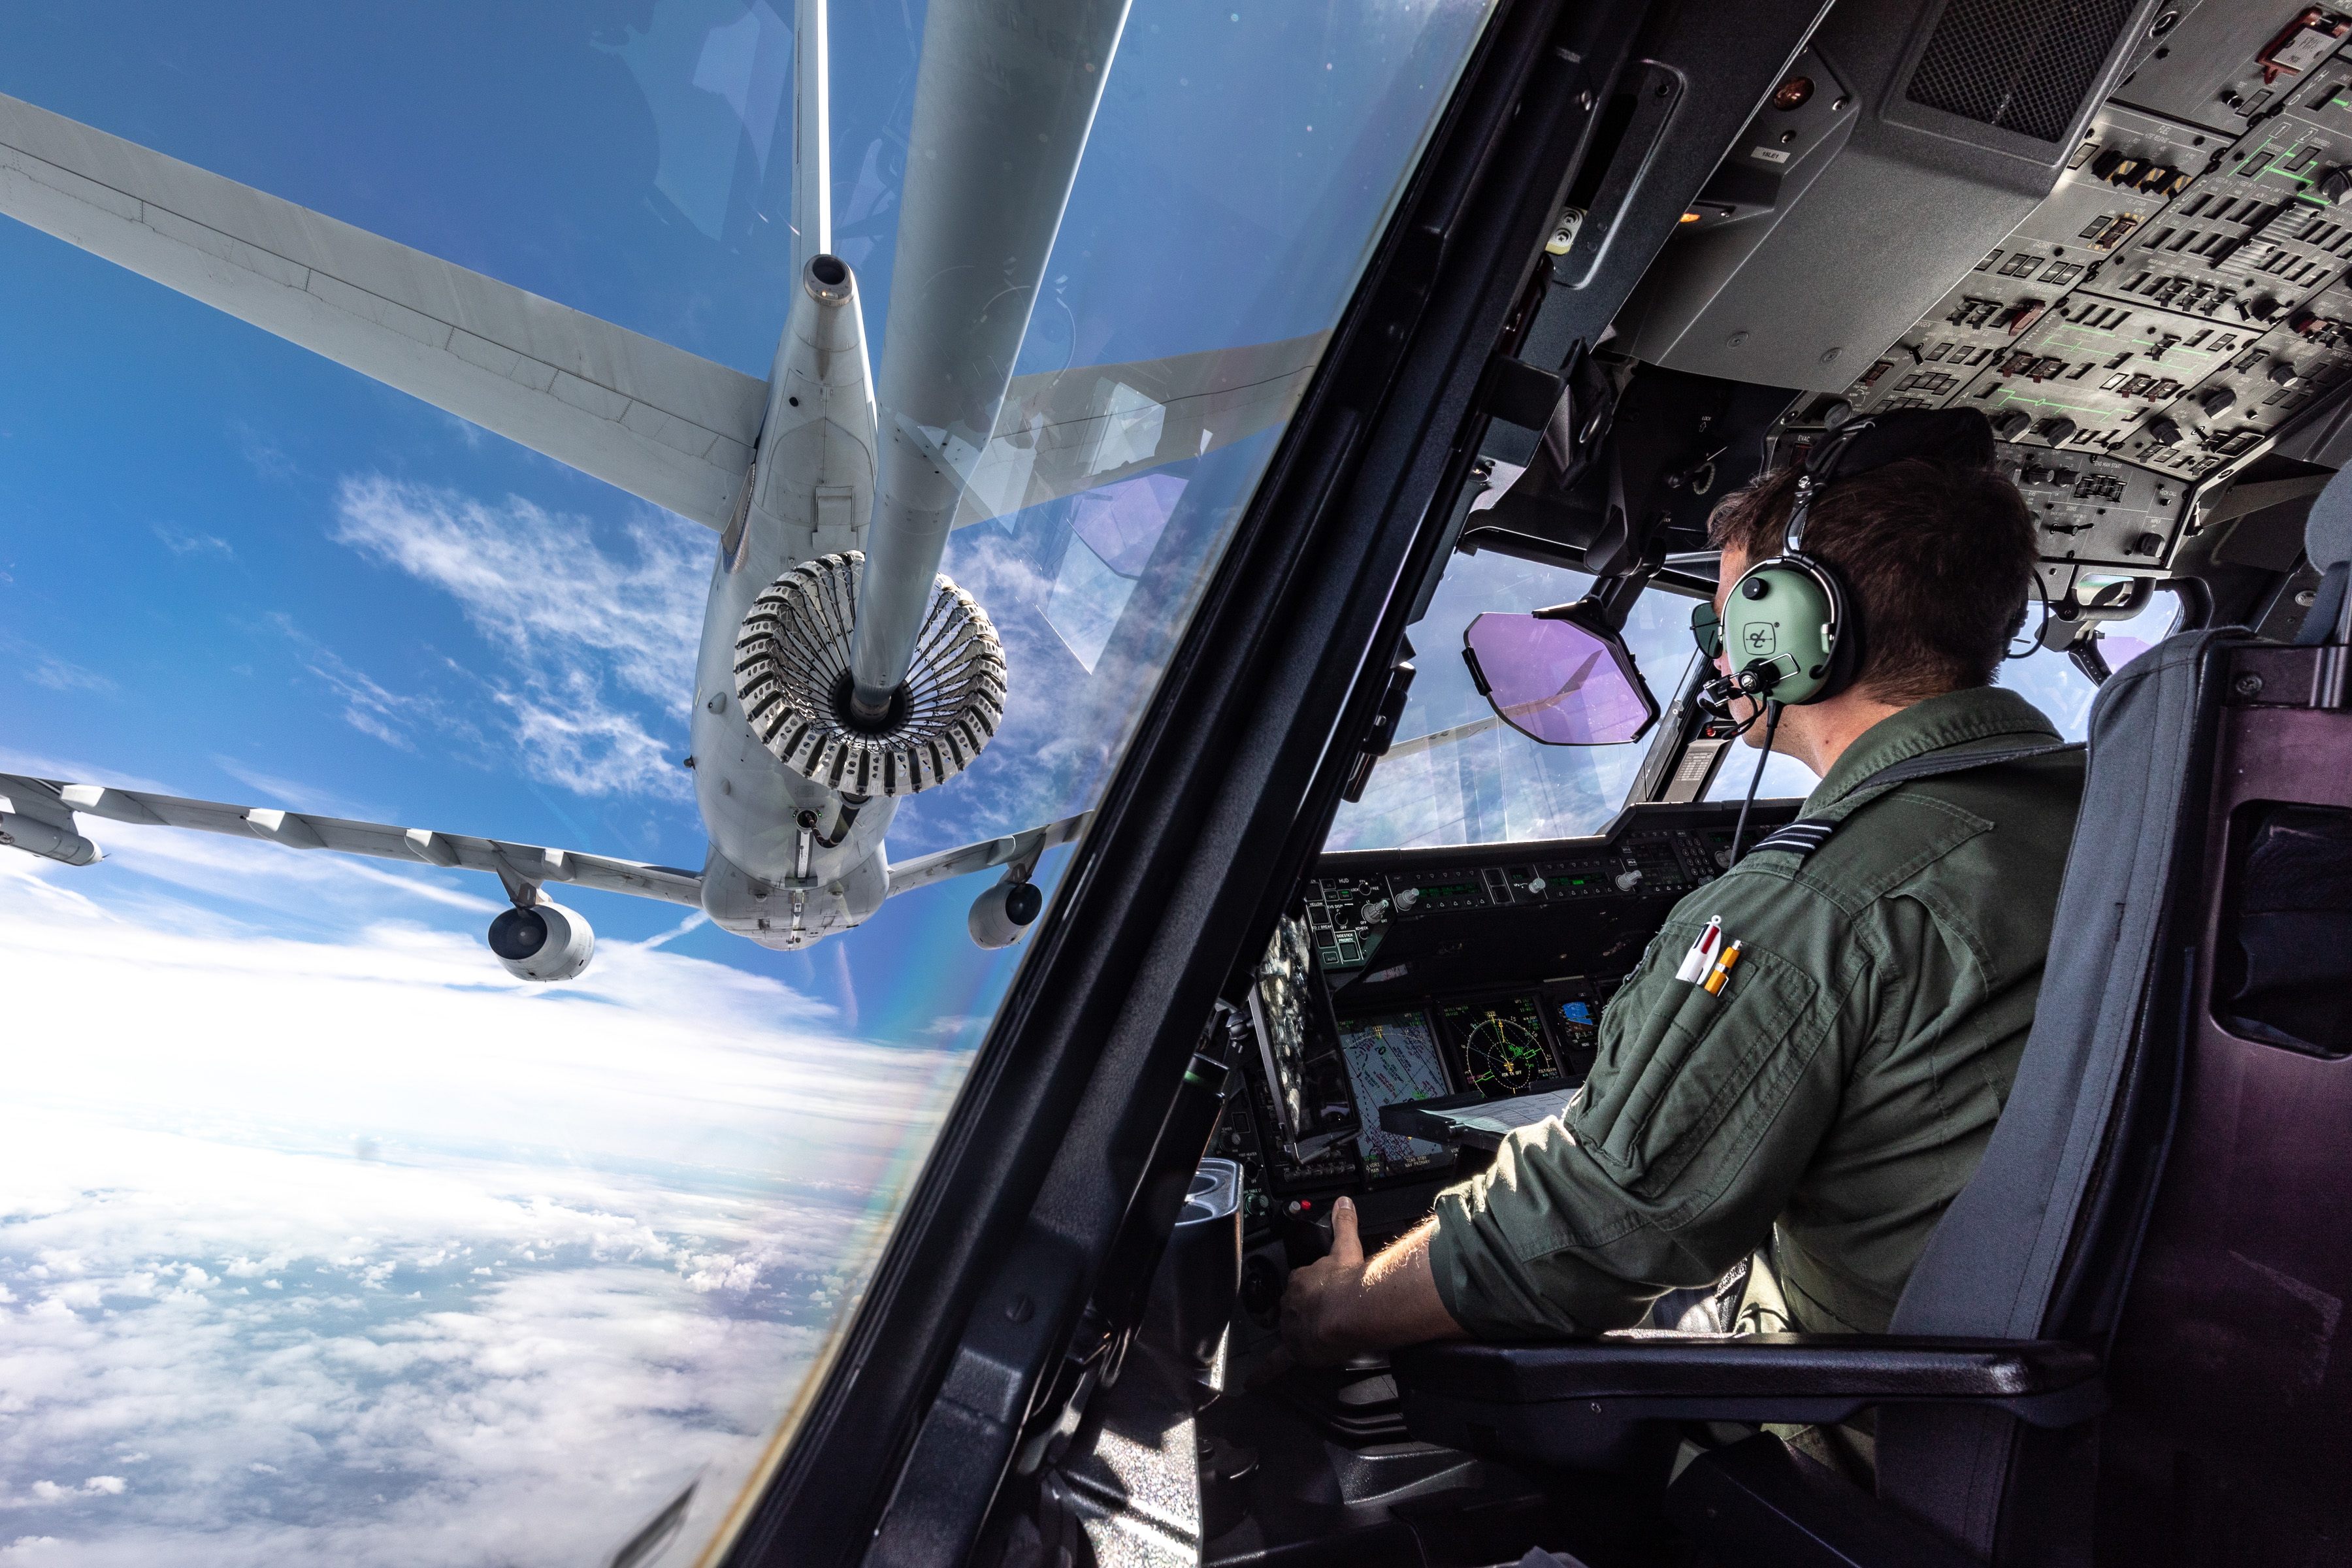 air-to-air refuelling, view from inside the aircraft seeing the pilots and the recieving plane